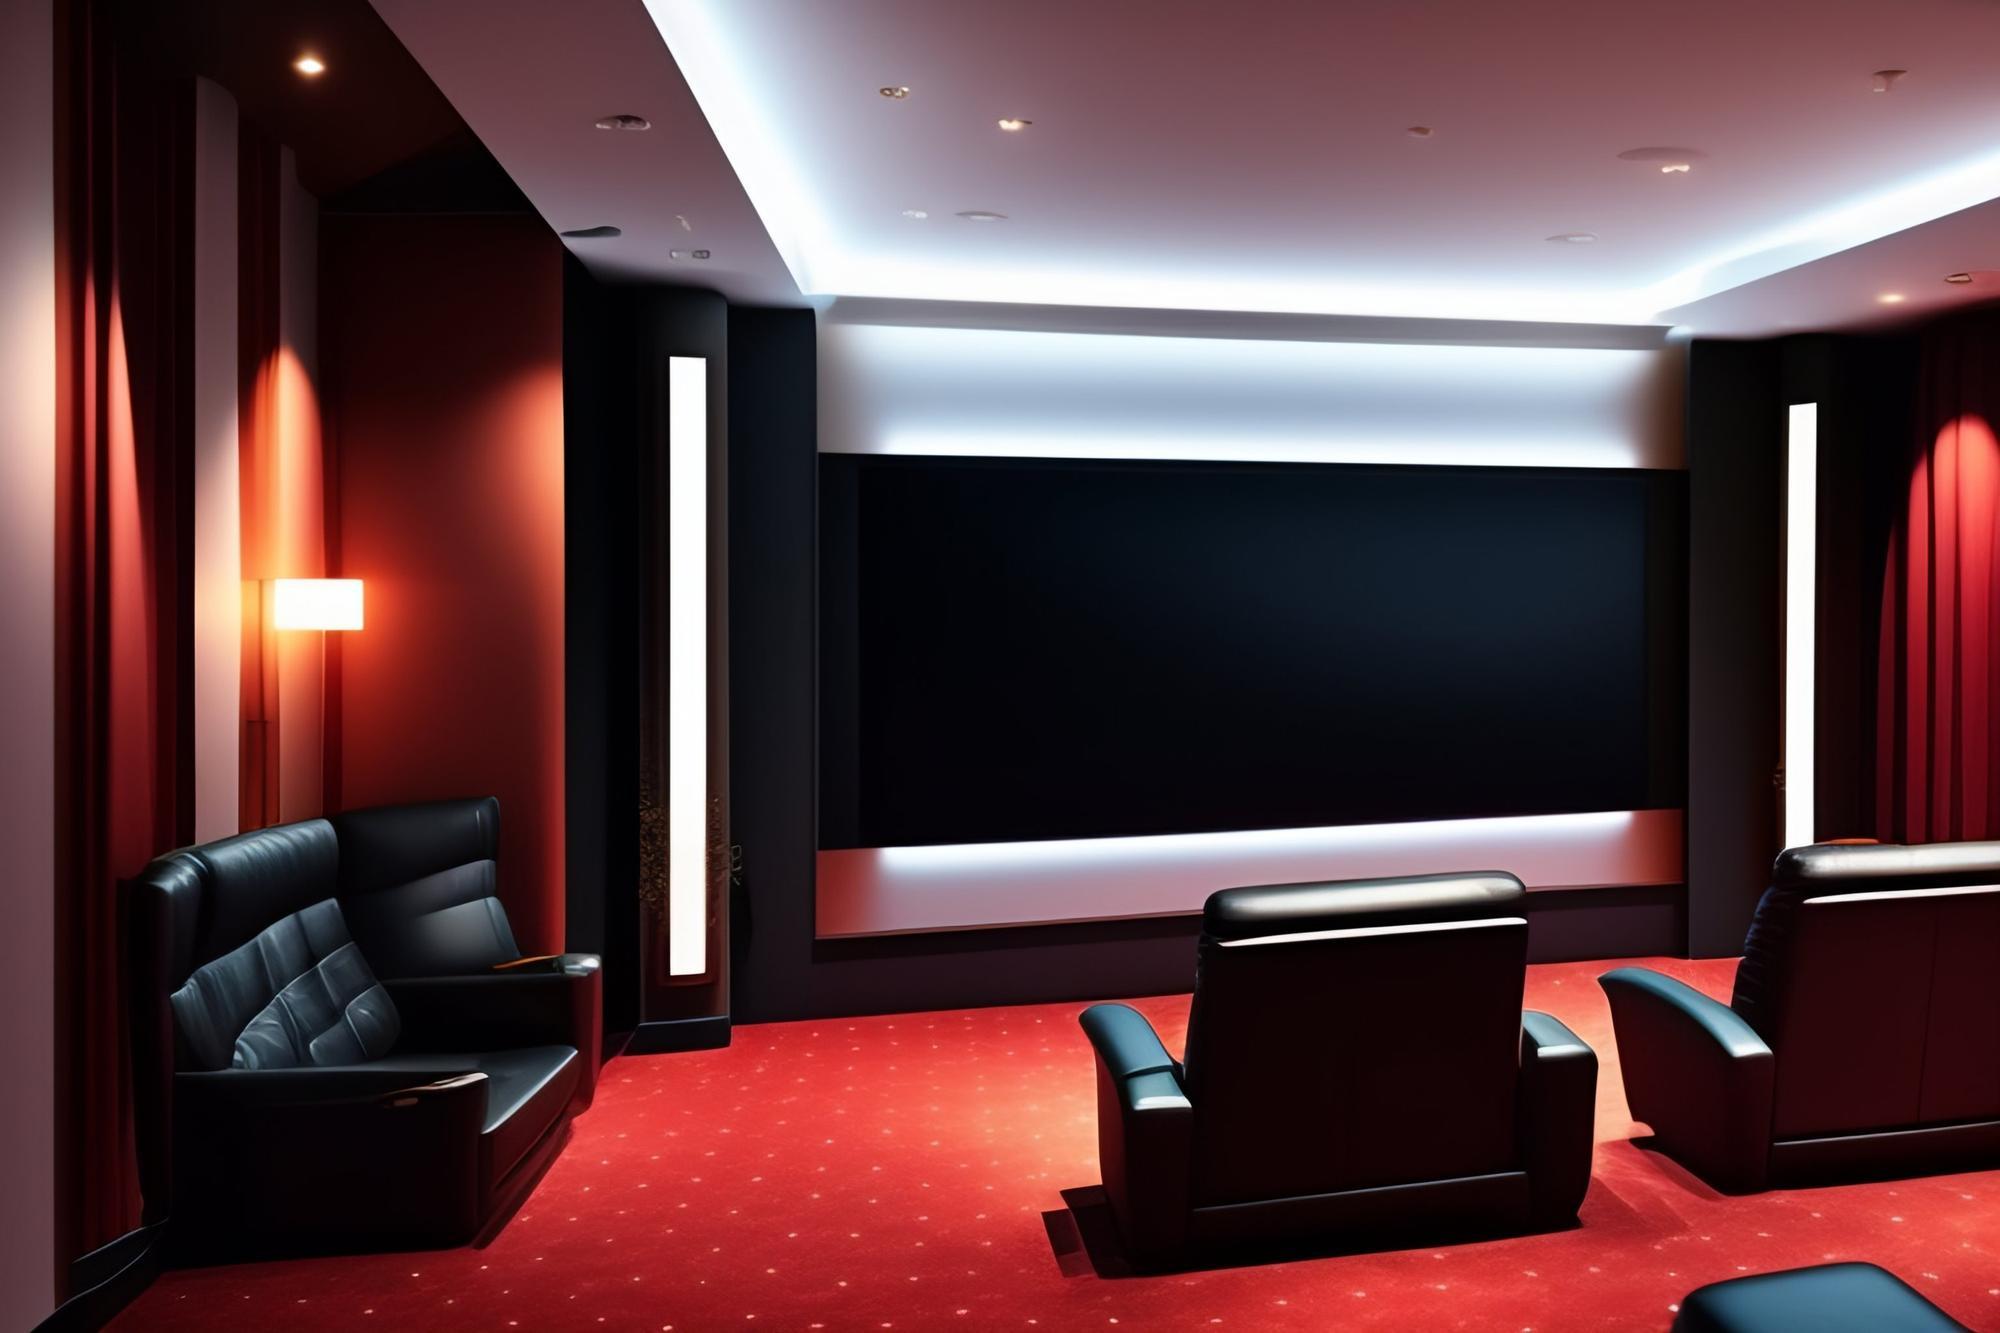 The Importance Of Acoustic Treatment And Soundproofing For Home Theaters